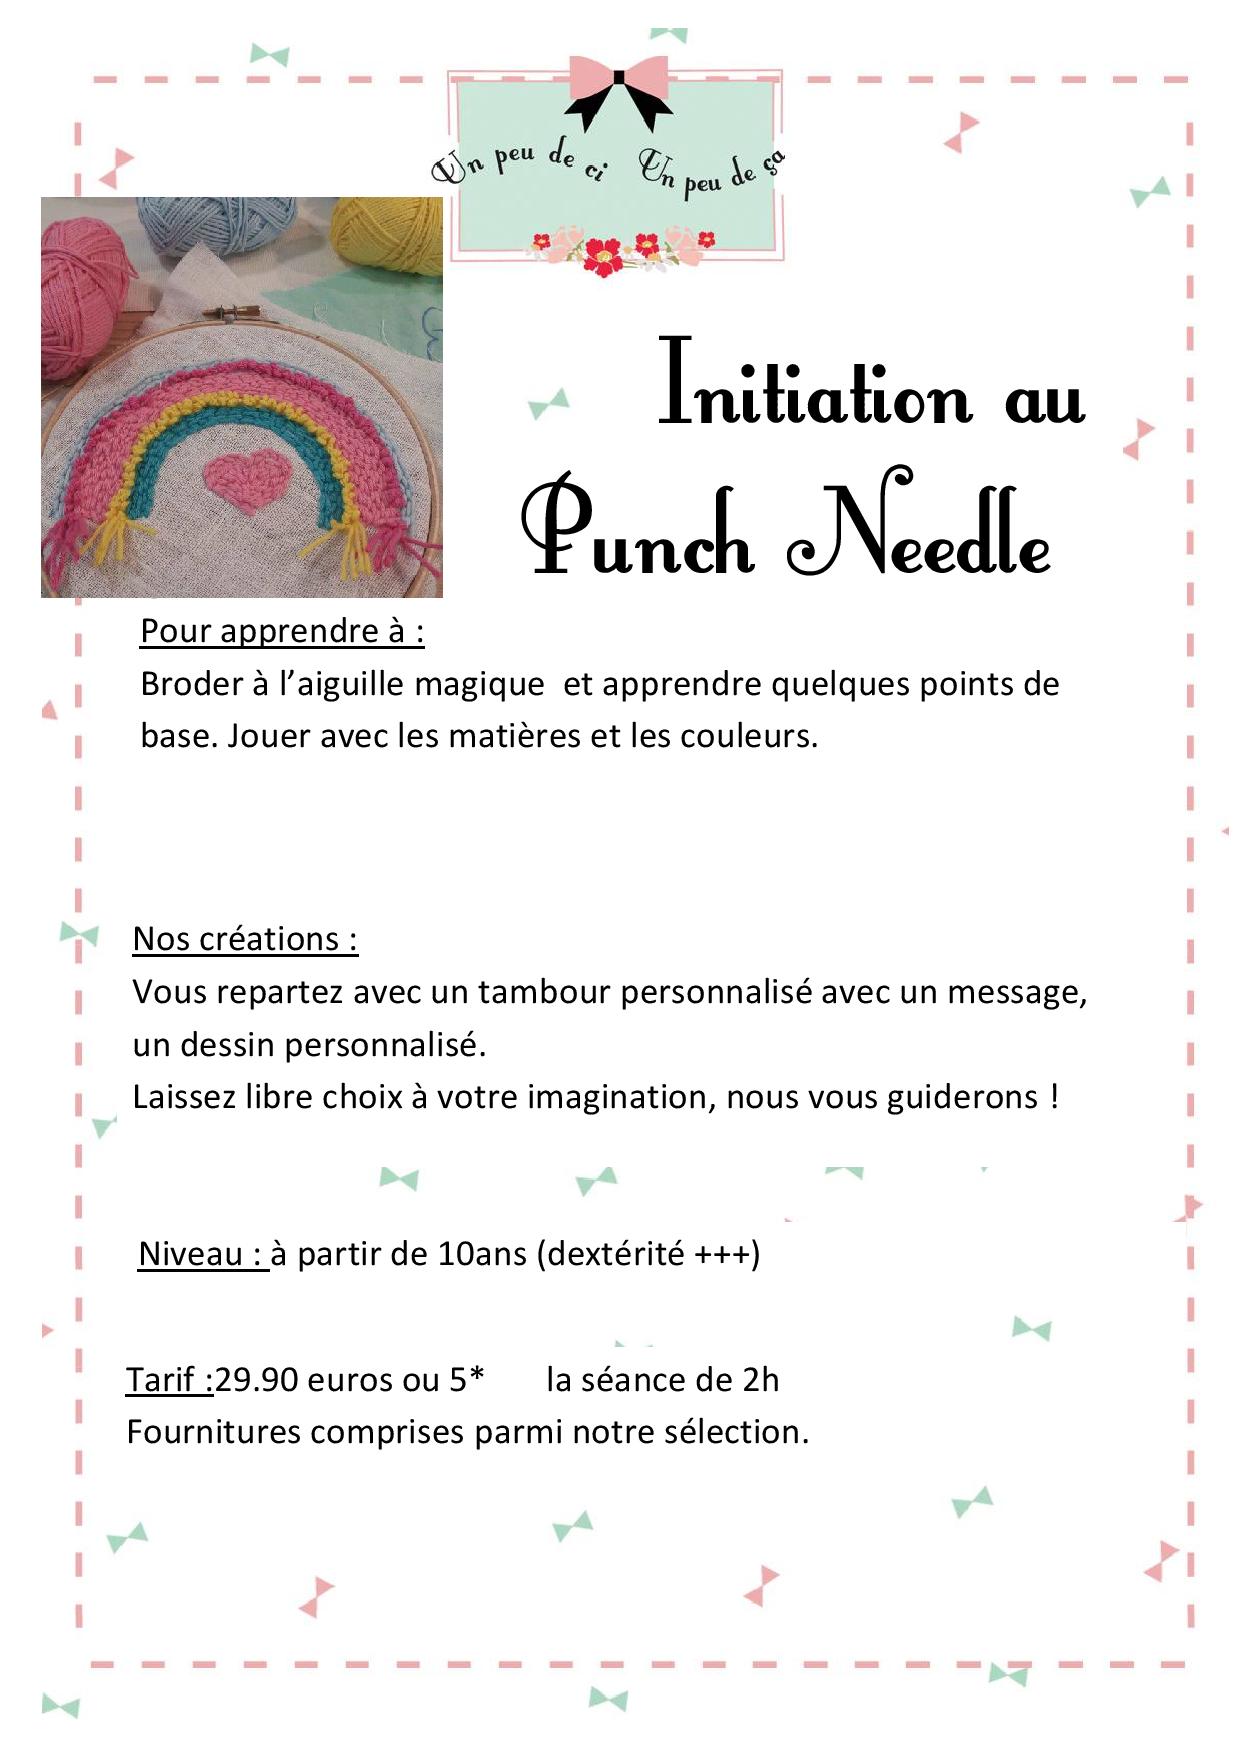 atelier punch needle broderie granville